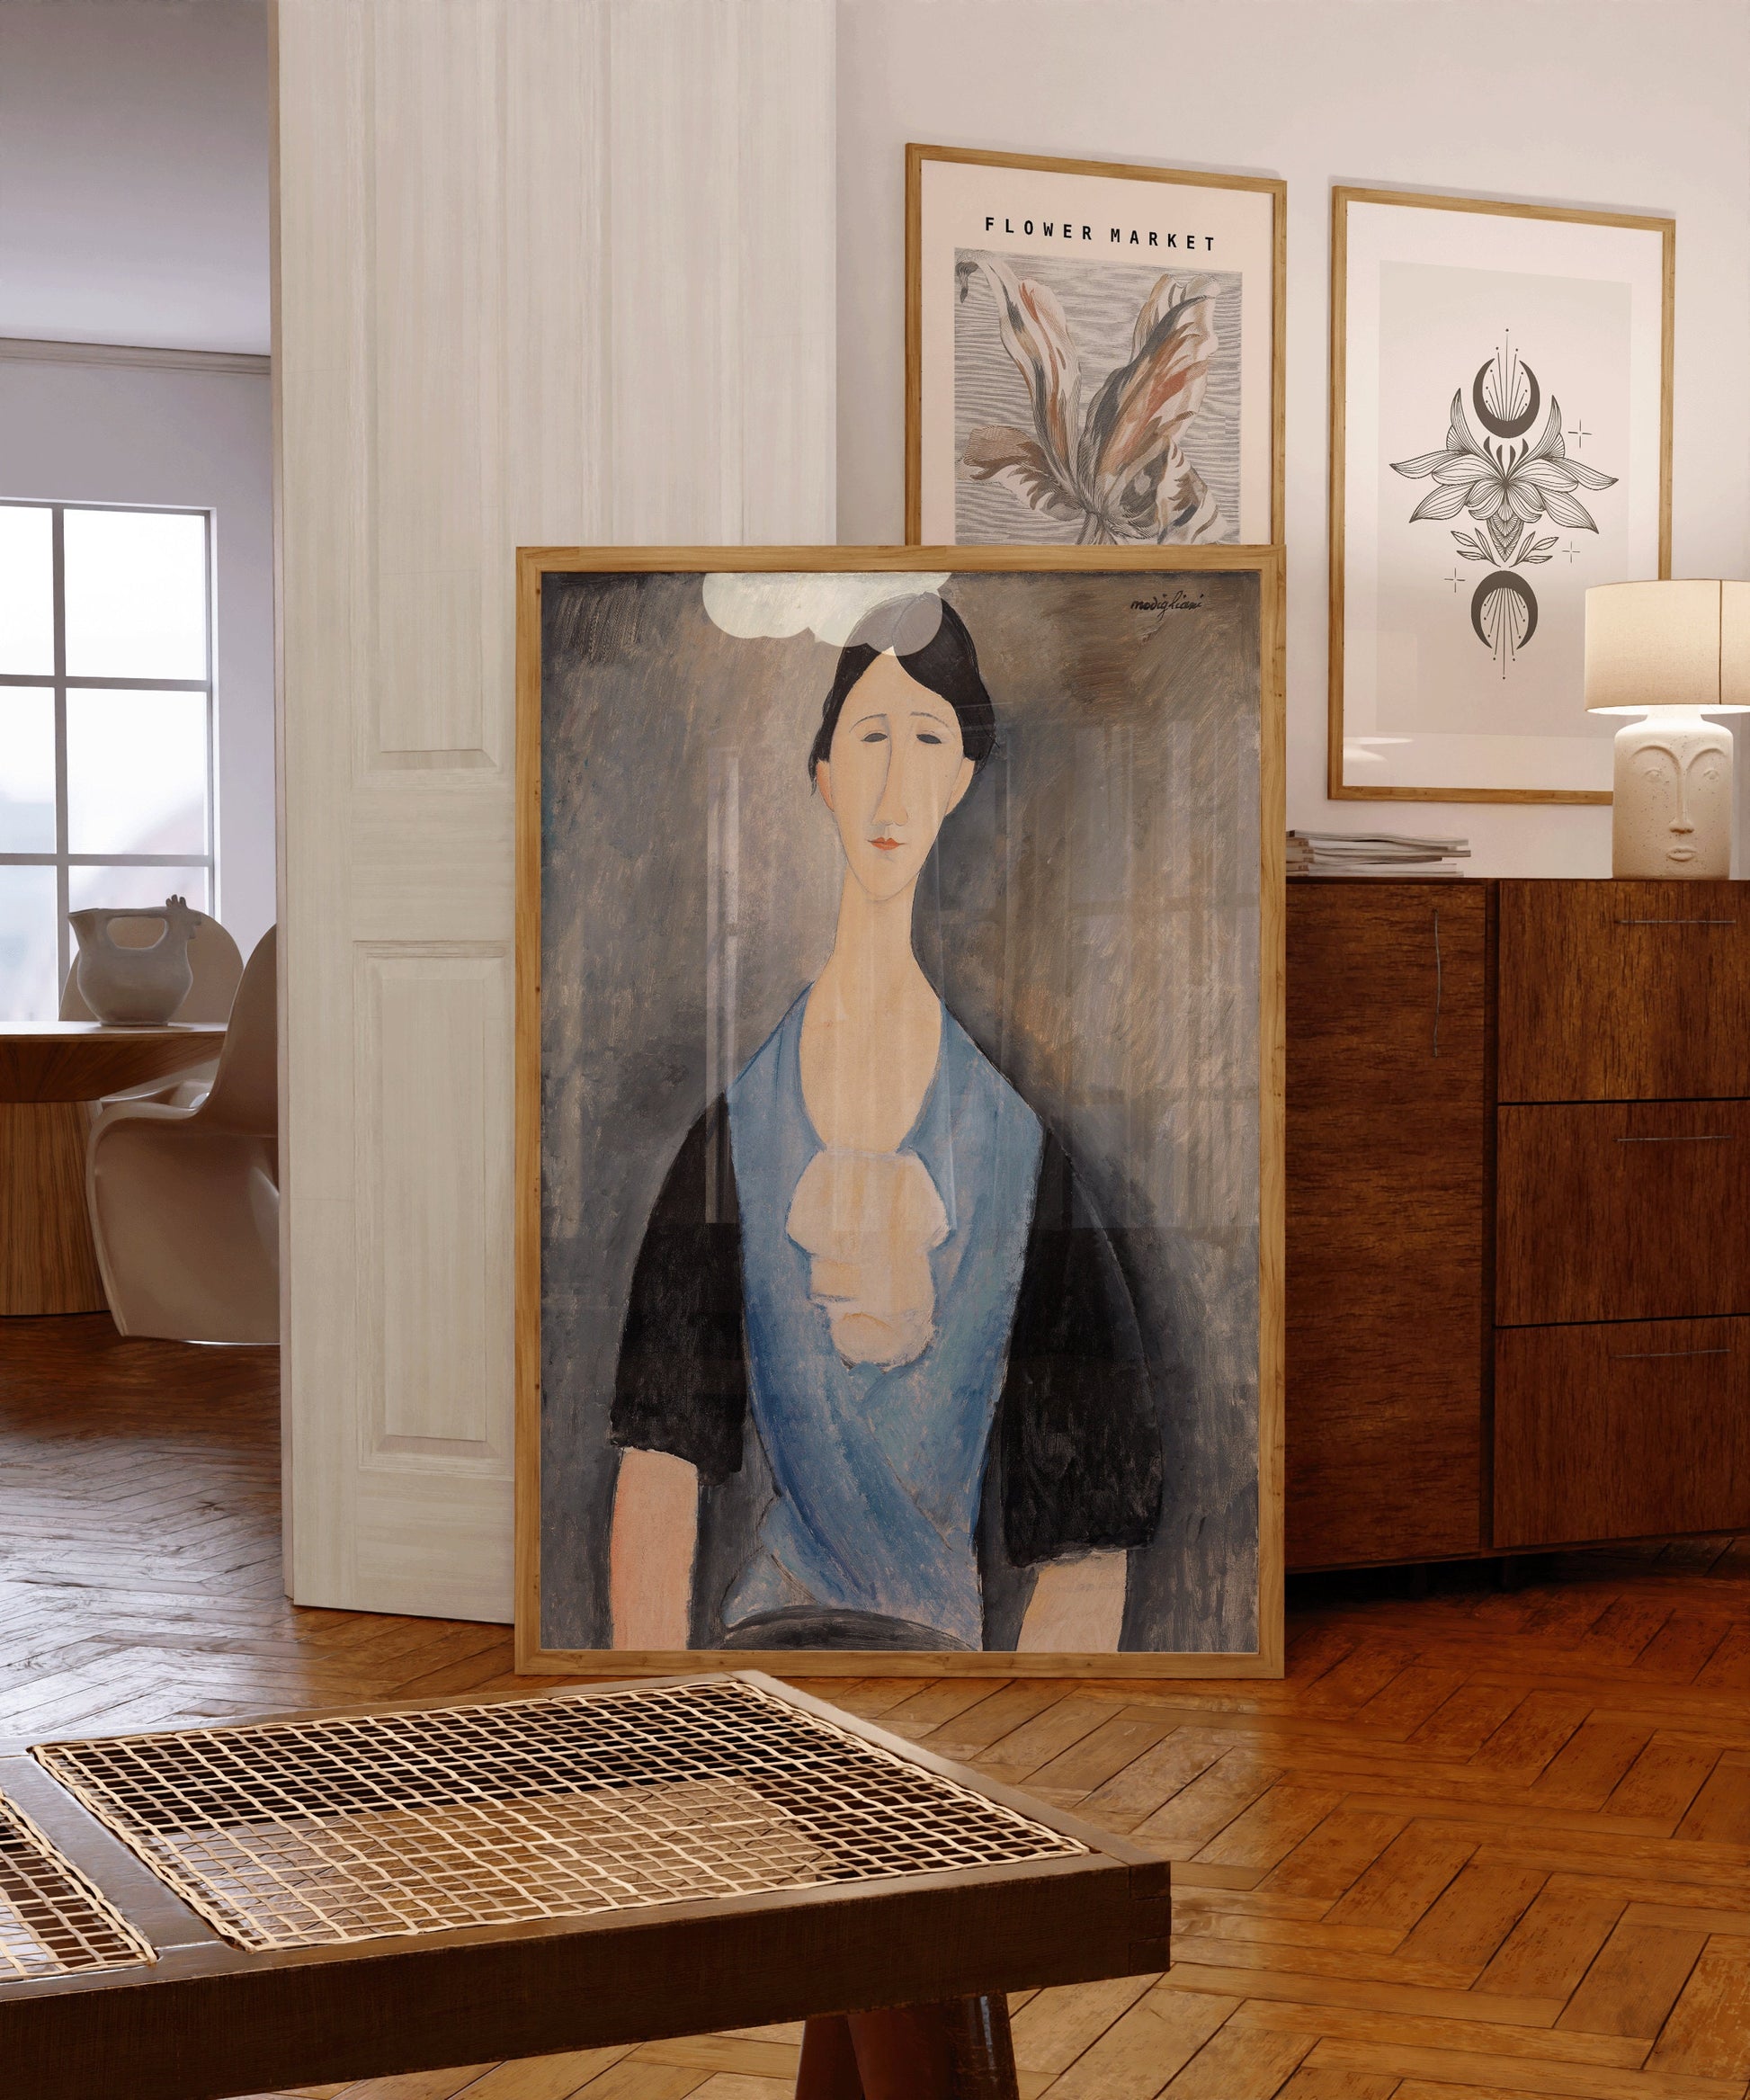 Ameodeo Modigliani Young Woman in Blue Fine Art Famous Iconic Painting Vintage Ready to hang Framed Home Office Decor Print Gift Idea